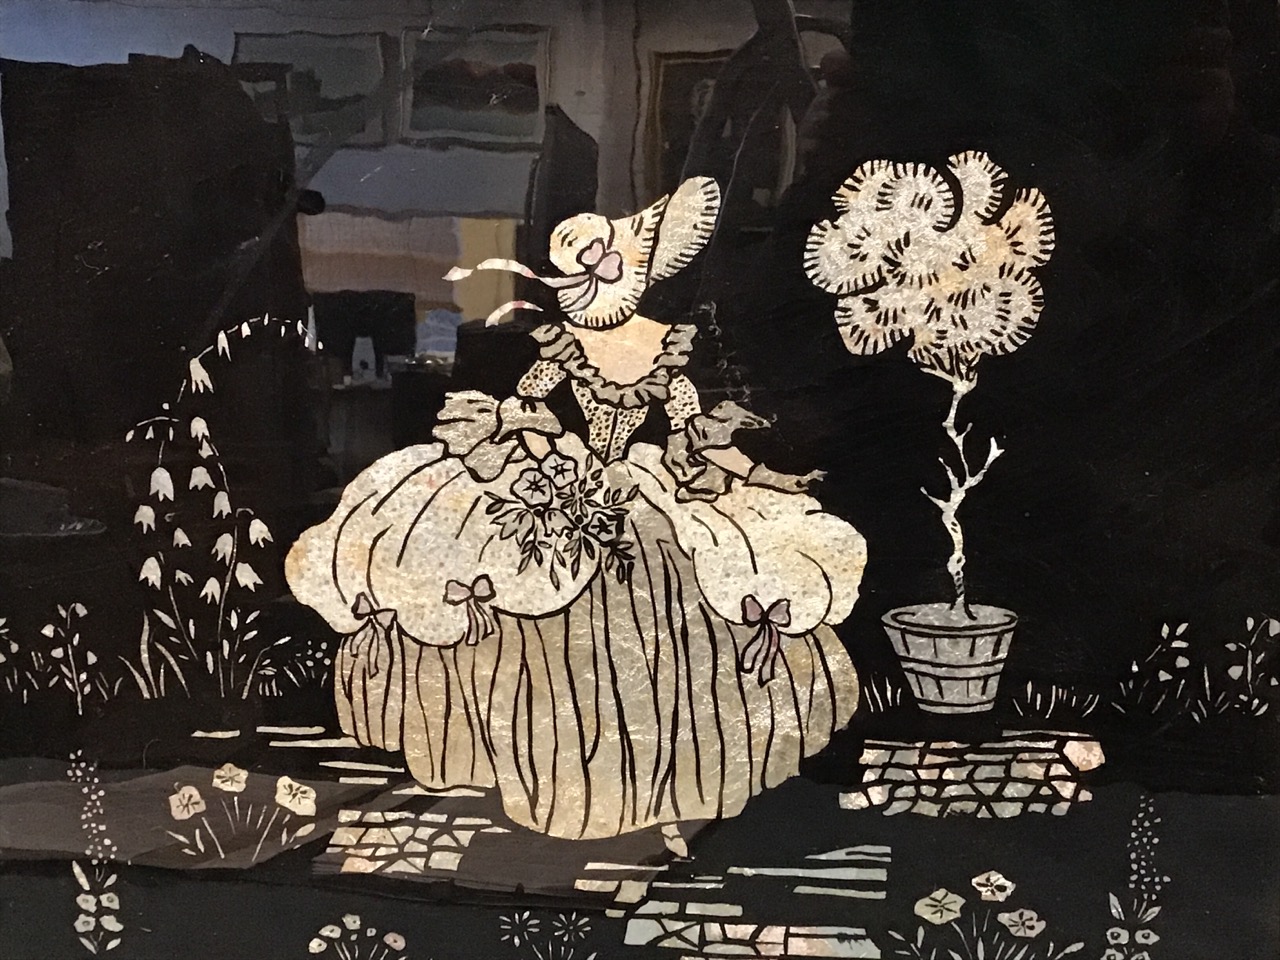 A 50s pressed silver foil silhouette picture depicting bonneted crinoline lady in garden on black